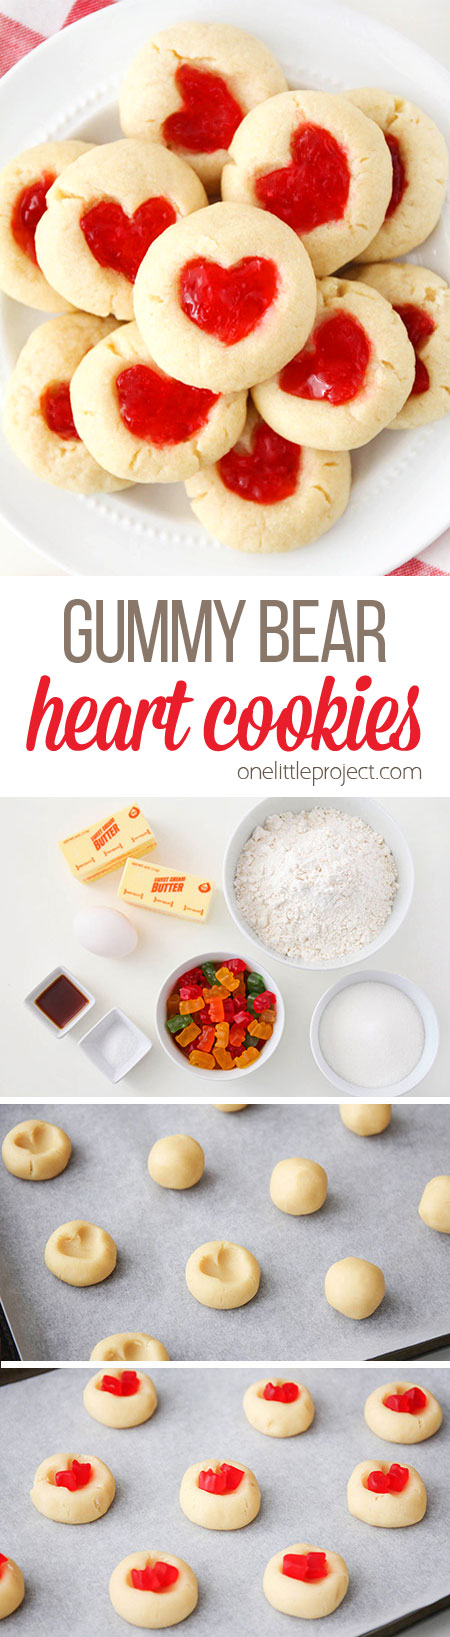 These gummy bear heart cookies are SO DELICIOUS! They're rich and buttery with a soft and sweet center and a simple shortbread base. Such an adorable cookie for Valentine's Day!